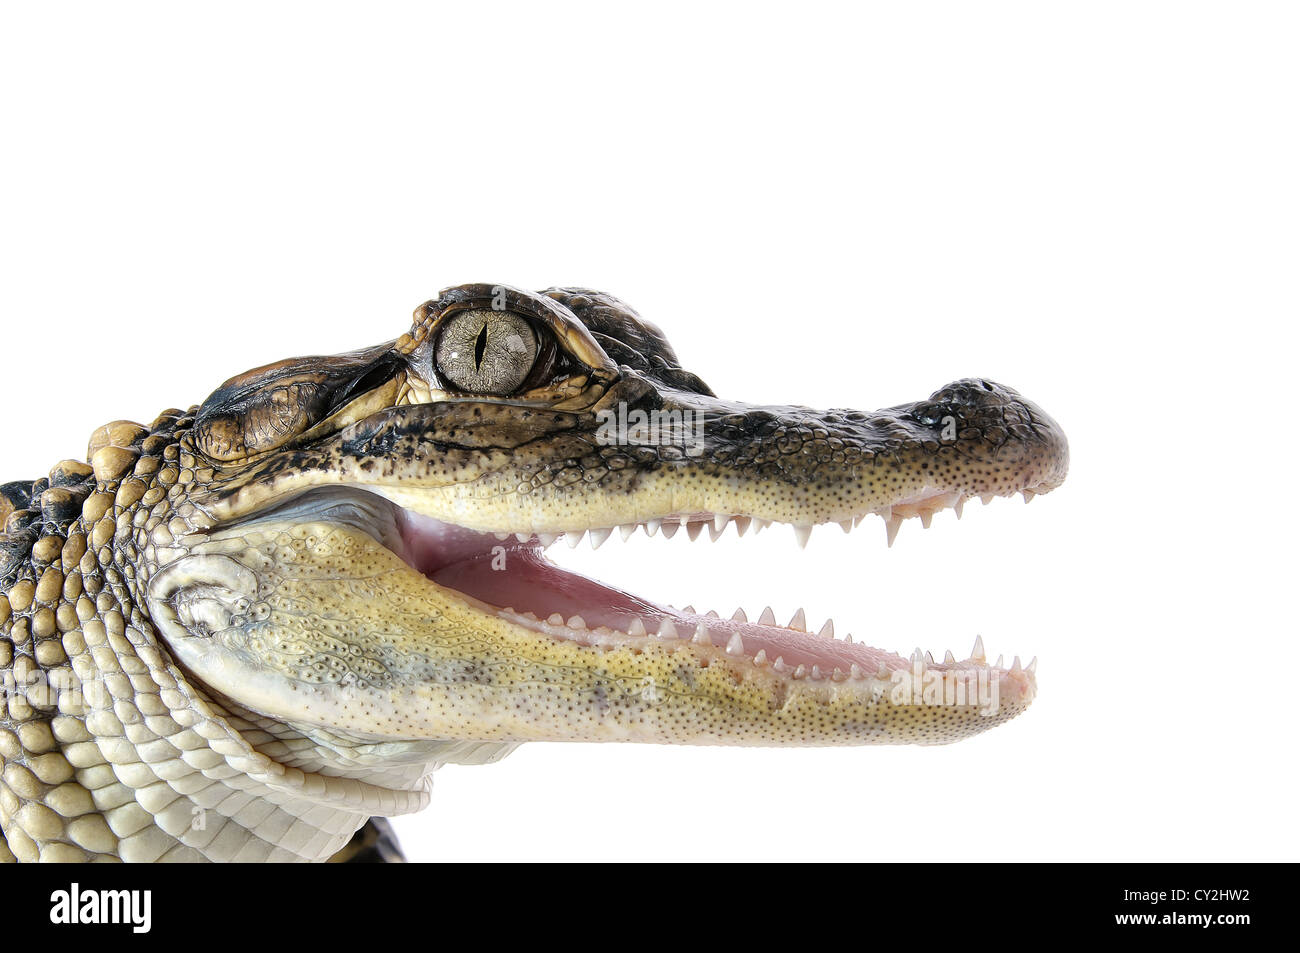 Close-up of young American Alligator on white background. Stock Photo